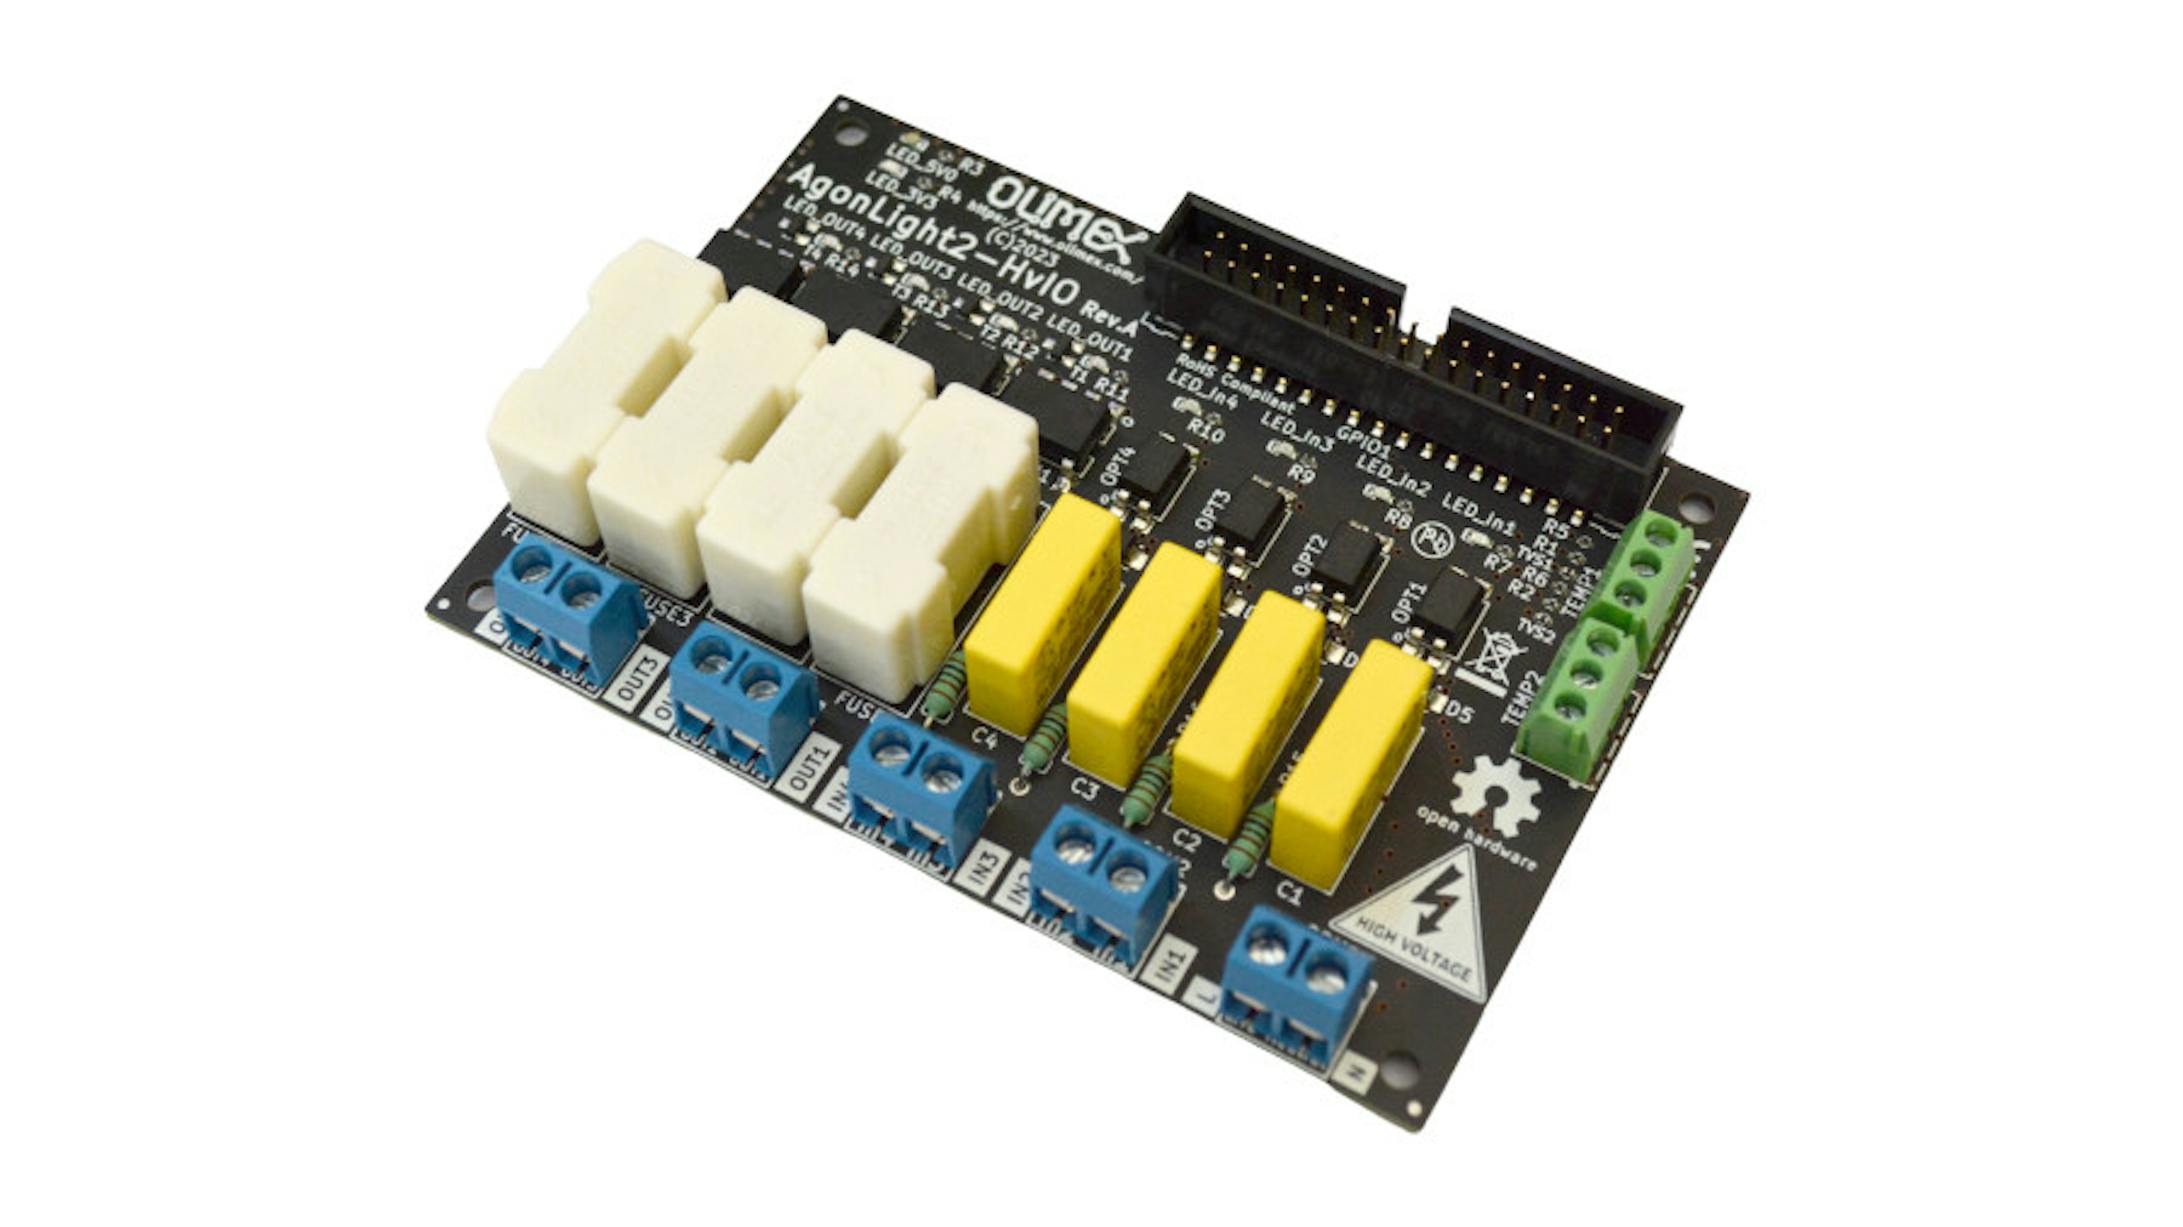 Olimex Launches Prototyping and Home/Industrial Automation Boards 